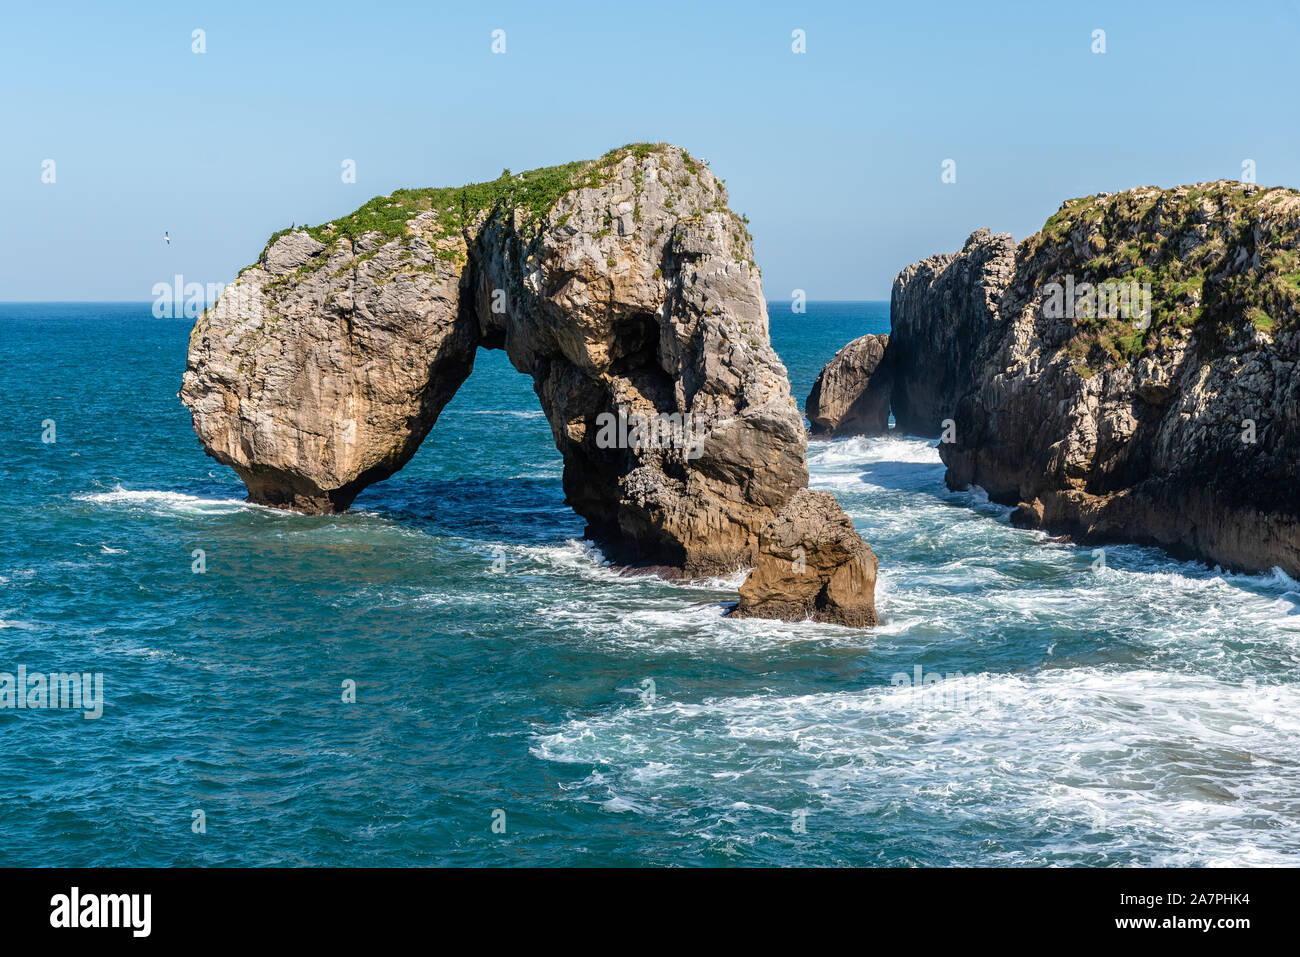 Scenic view of waves splashing against the rocky coast against blue sky. Castro de las Gaviotas, Fort of the Seagulls, and Beach of the Huelga, Llanes Stock Photo